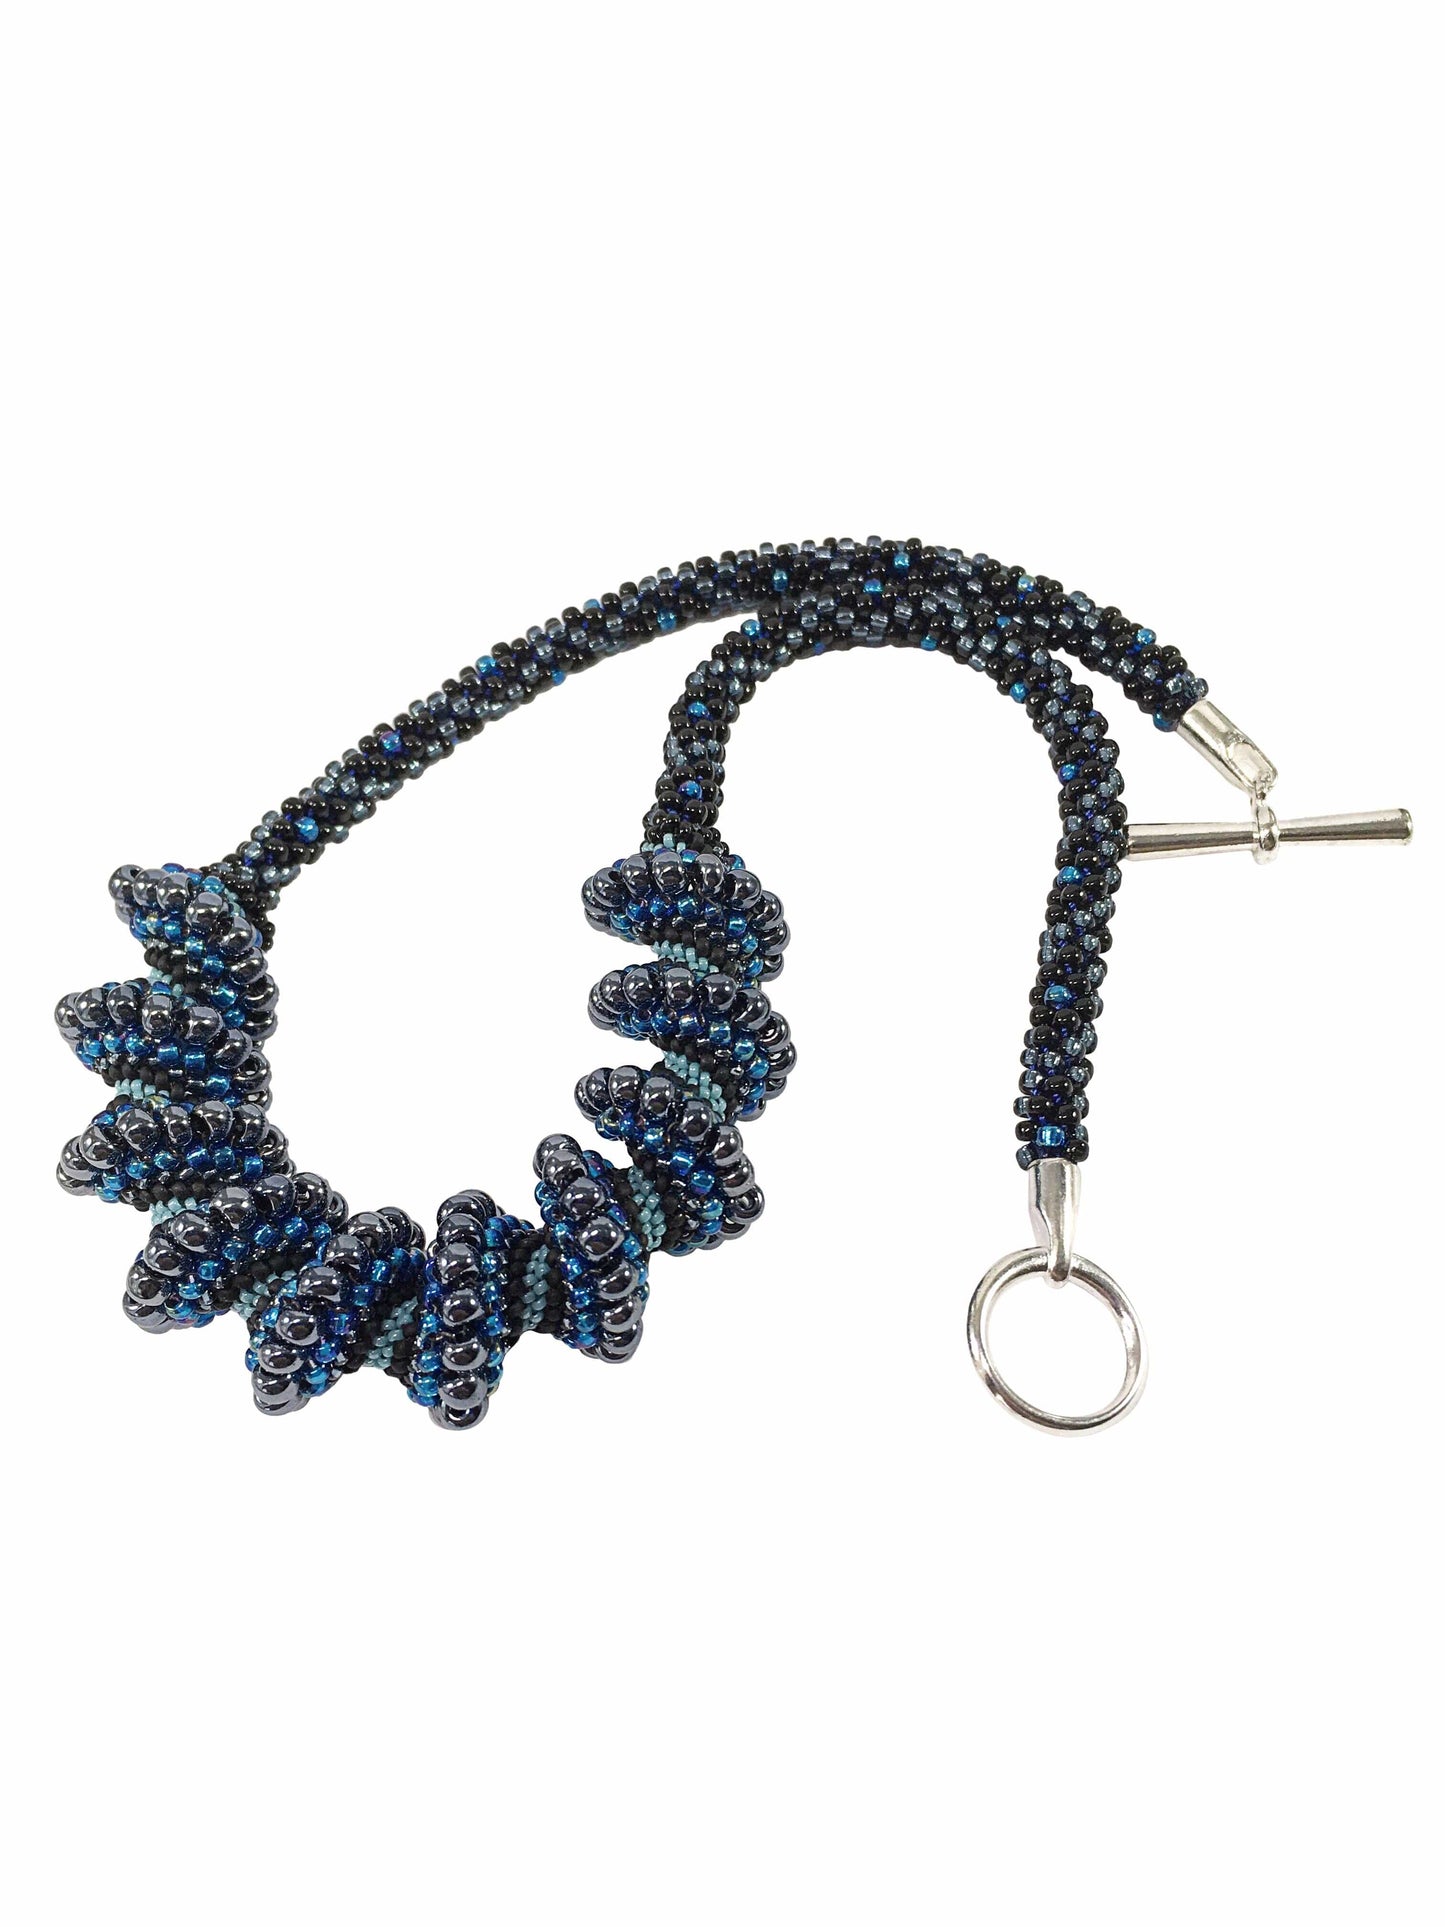 Beaded Cellini Spiral Statement Necklace